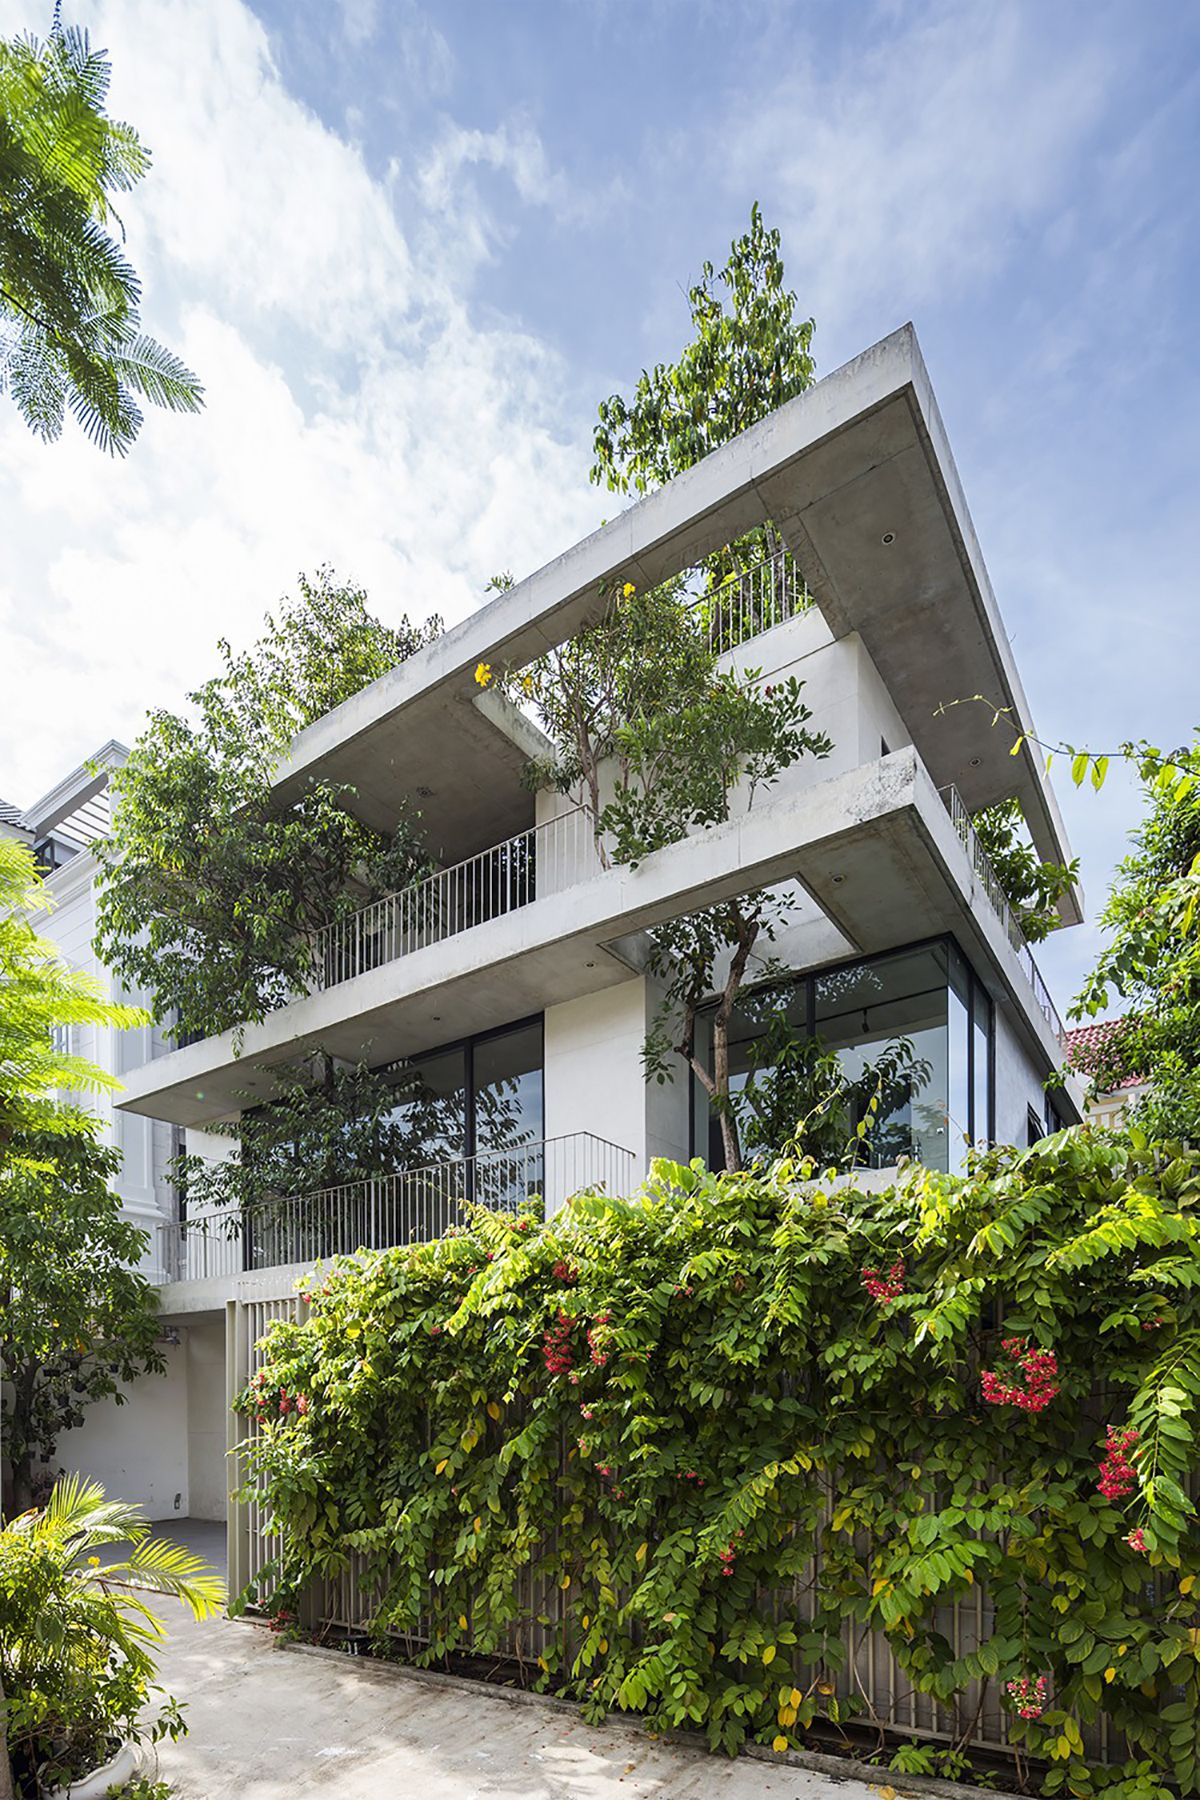 kienviet Truong Dai Hoc FPT Ha Noi va Stacked Planter House cua Vo Trong Nghia Architects VTN Architects gianh chien thang tai World Architecture Awards lan thu 42 13 1